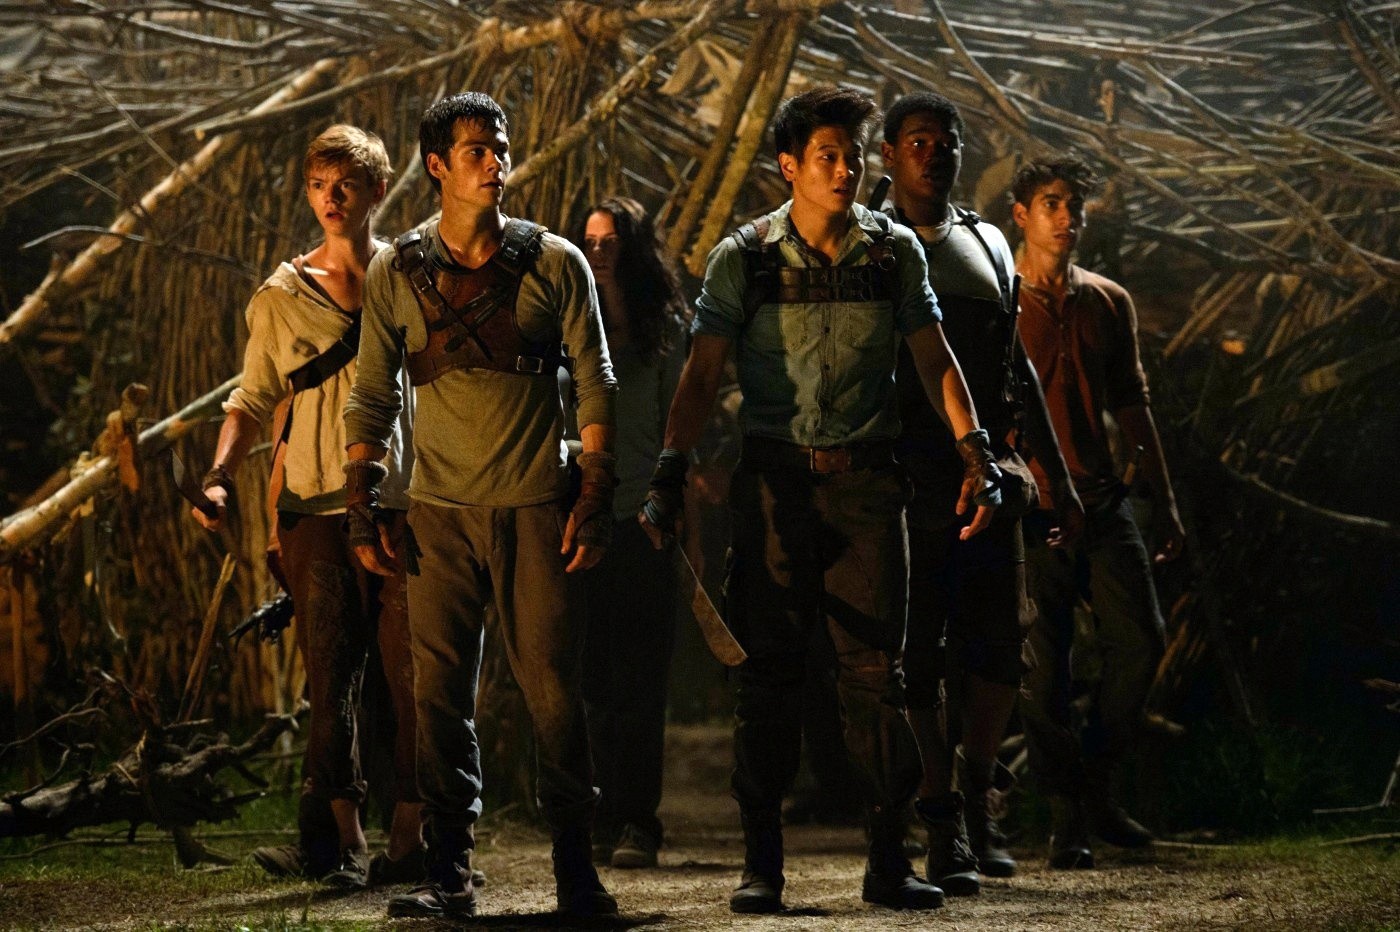 Will Poulter, Dylan O'Brien, Ki Hong Lee and Aml Ameen in 20th Century Fox's The Maze Runner (2014)